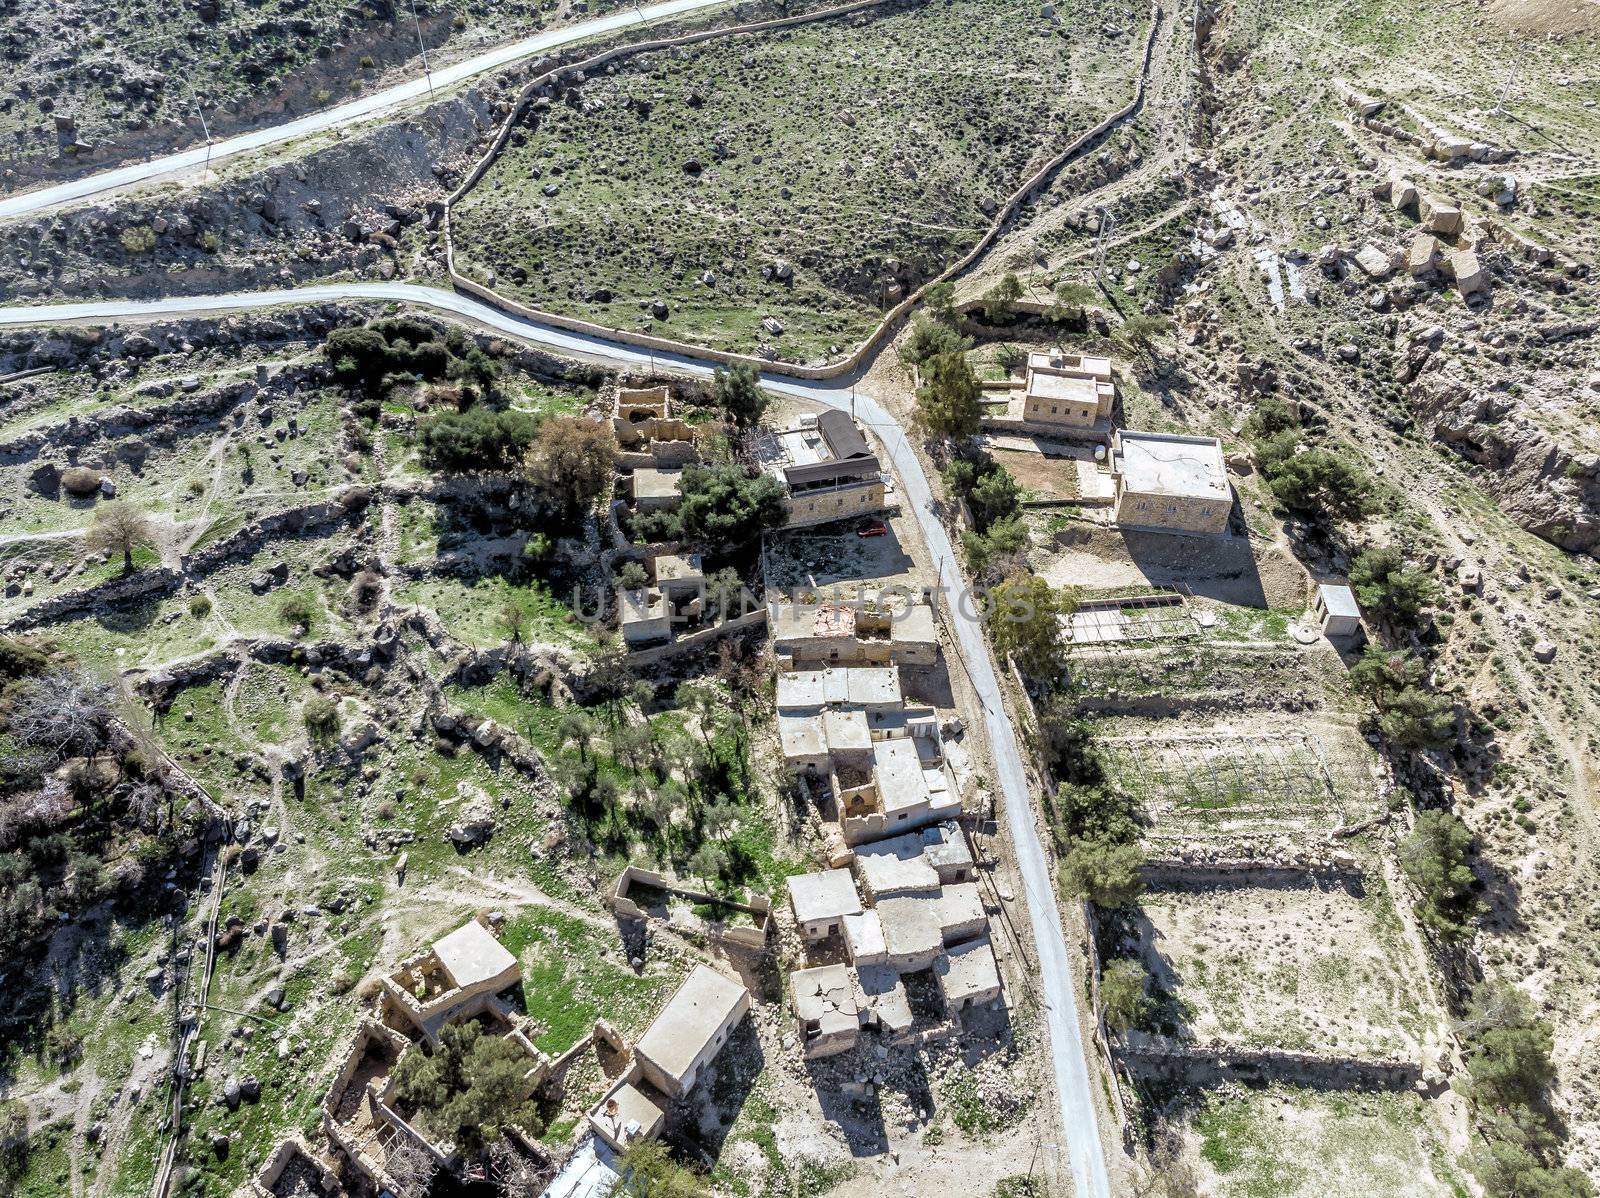 Aerial view of the village Dana and its surroundings at the edge of the Biosphere Reserve of Dana in Jordan by geogif